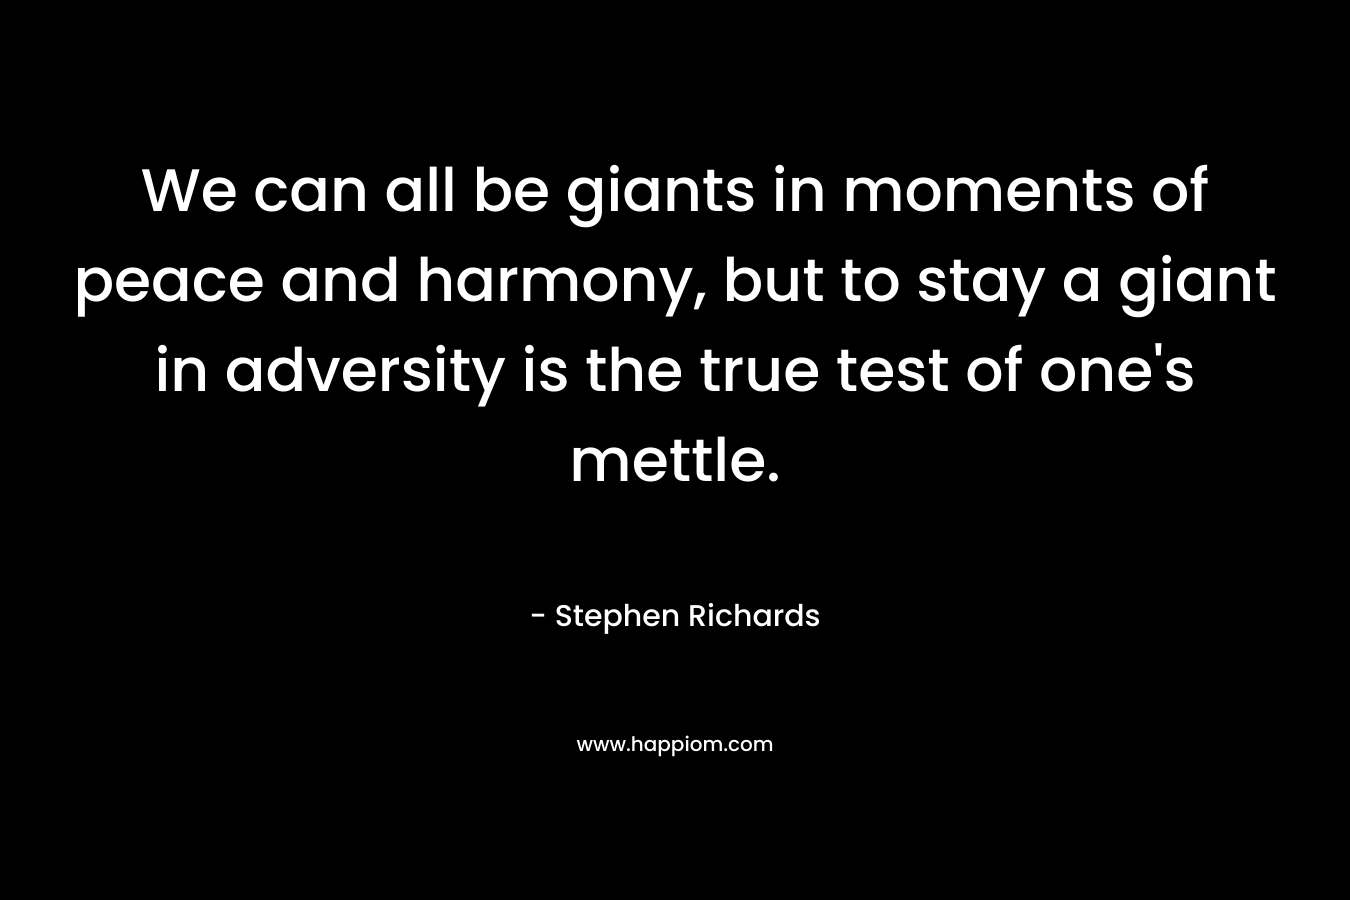 We can all be giants in moments of peace and harmony, but to stay a giant in adversity is the true test of one's mettle.